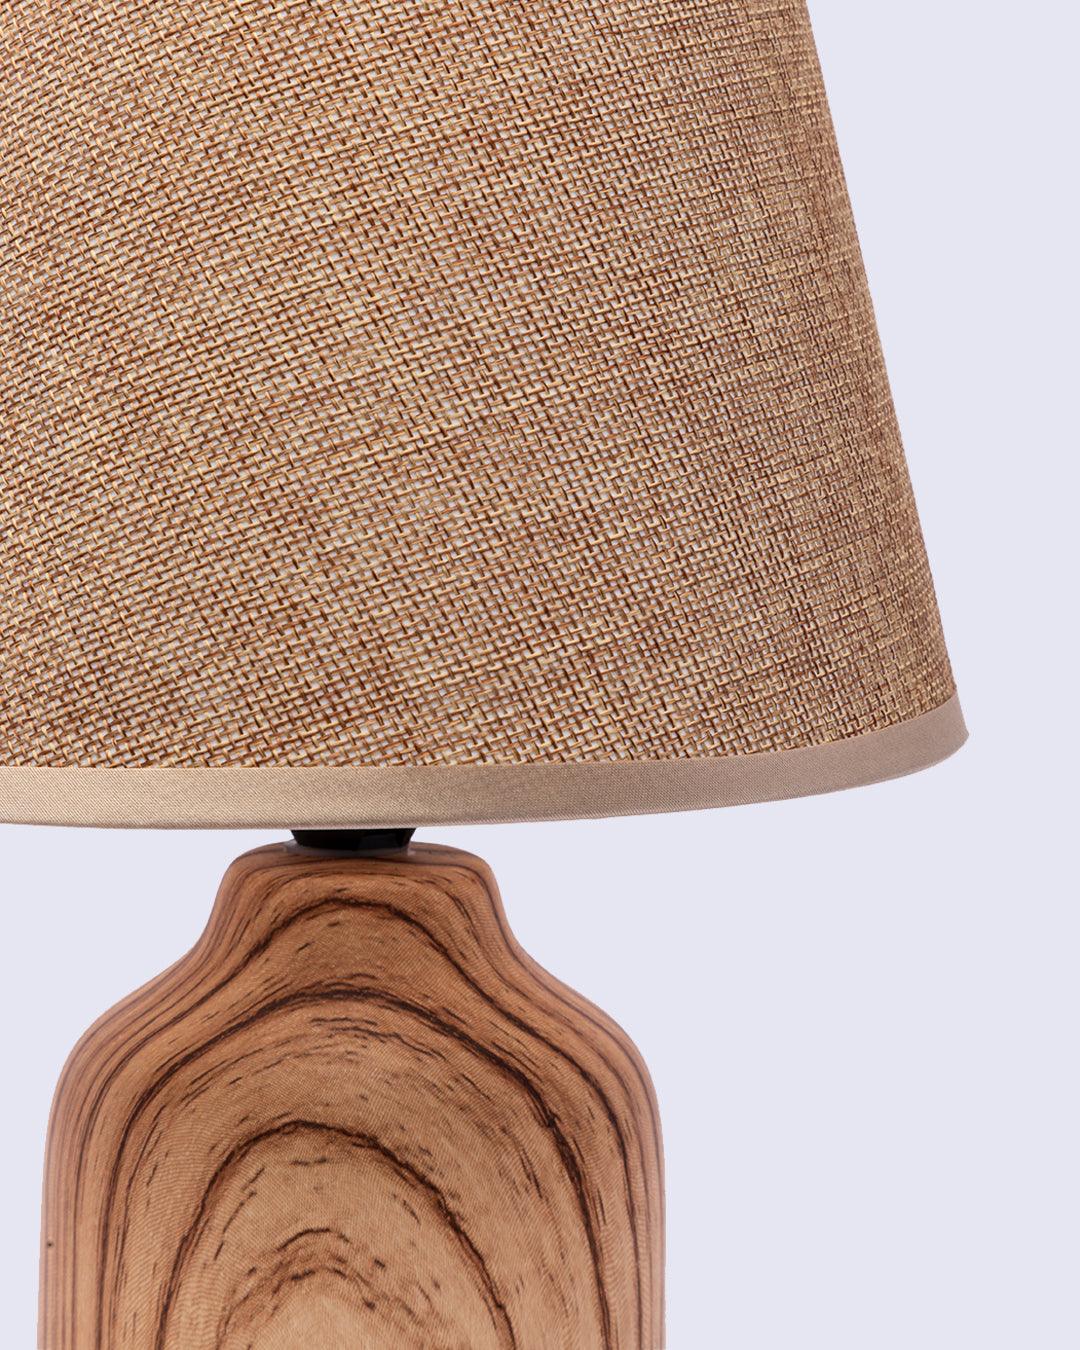 Market99 Table Lamp, with Shade, Drum Shape, Brown, Ceramic - MARKET 99